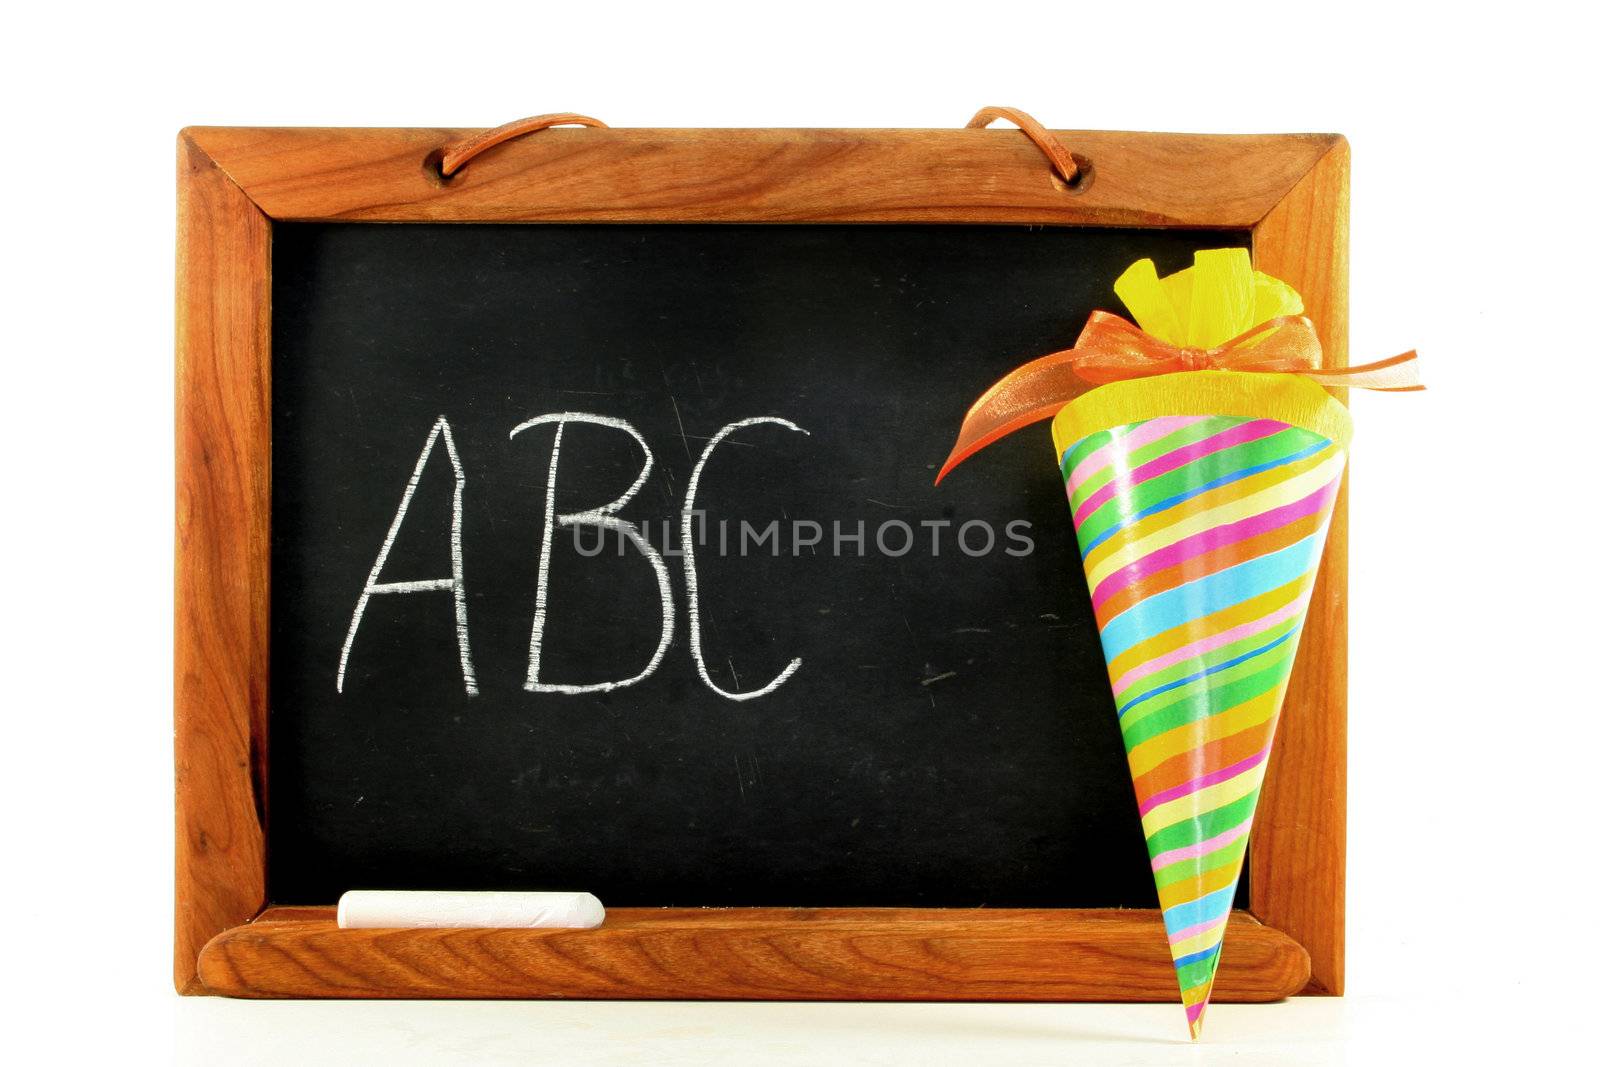 School board and school cone on a white background